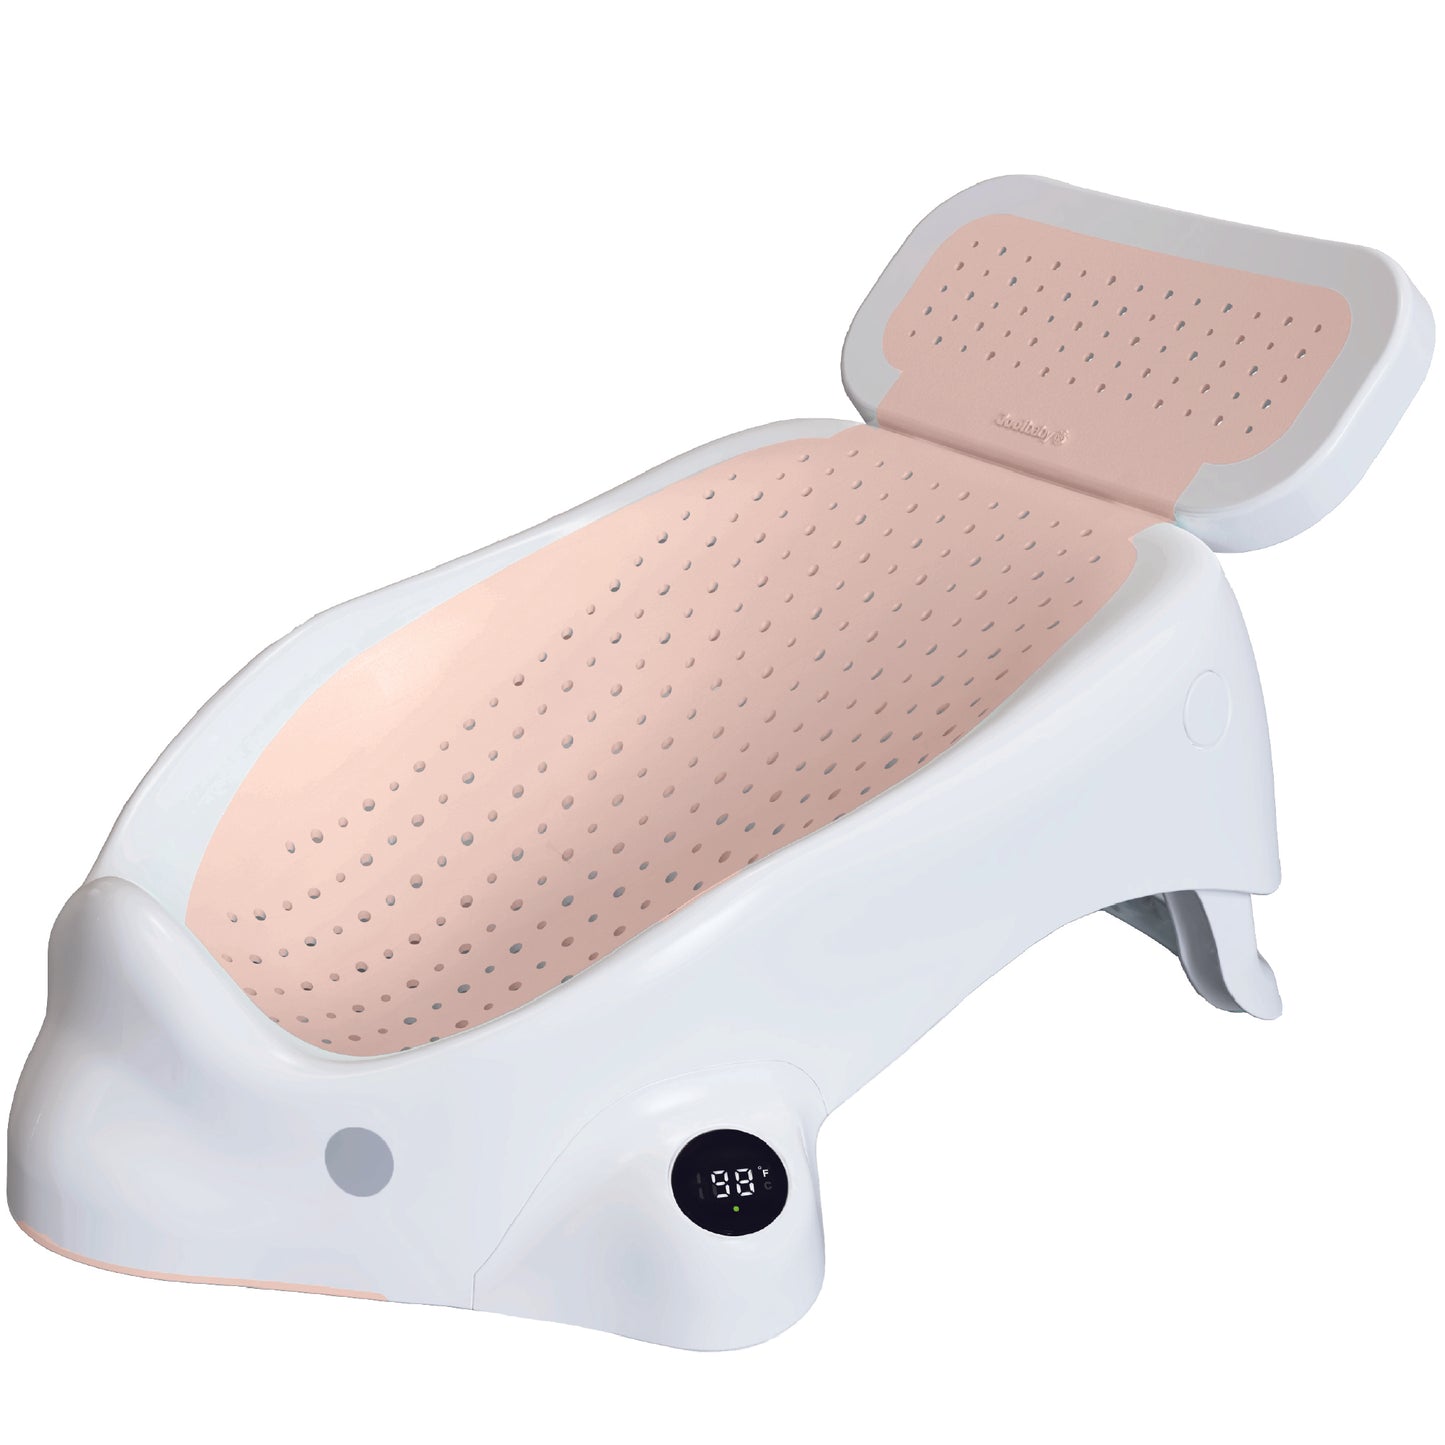 Hot Sale Folding Baby Bather for Baby Bath Safety Easy